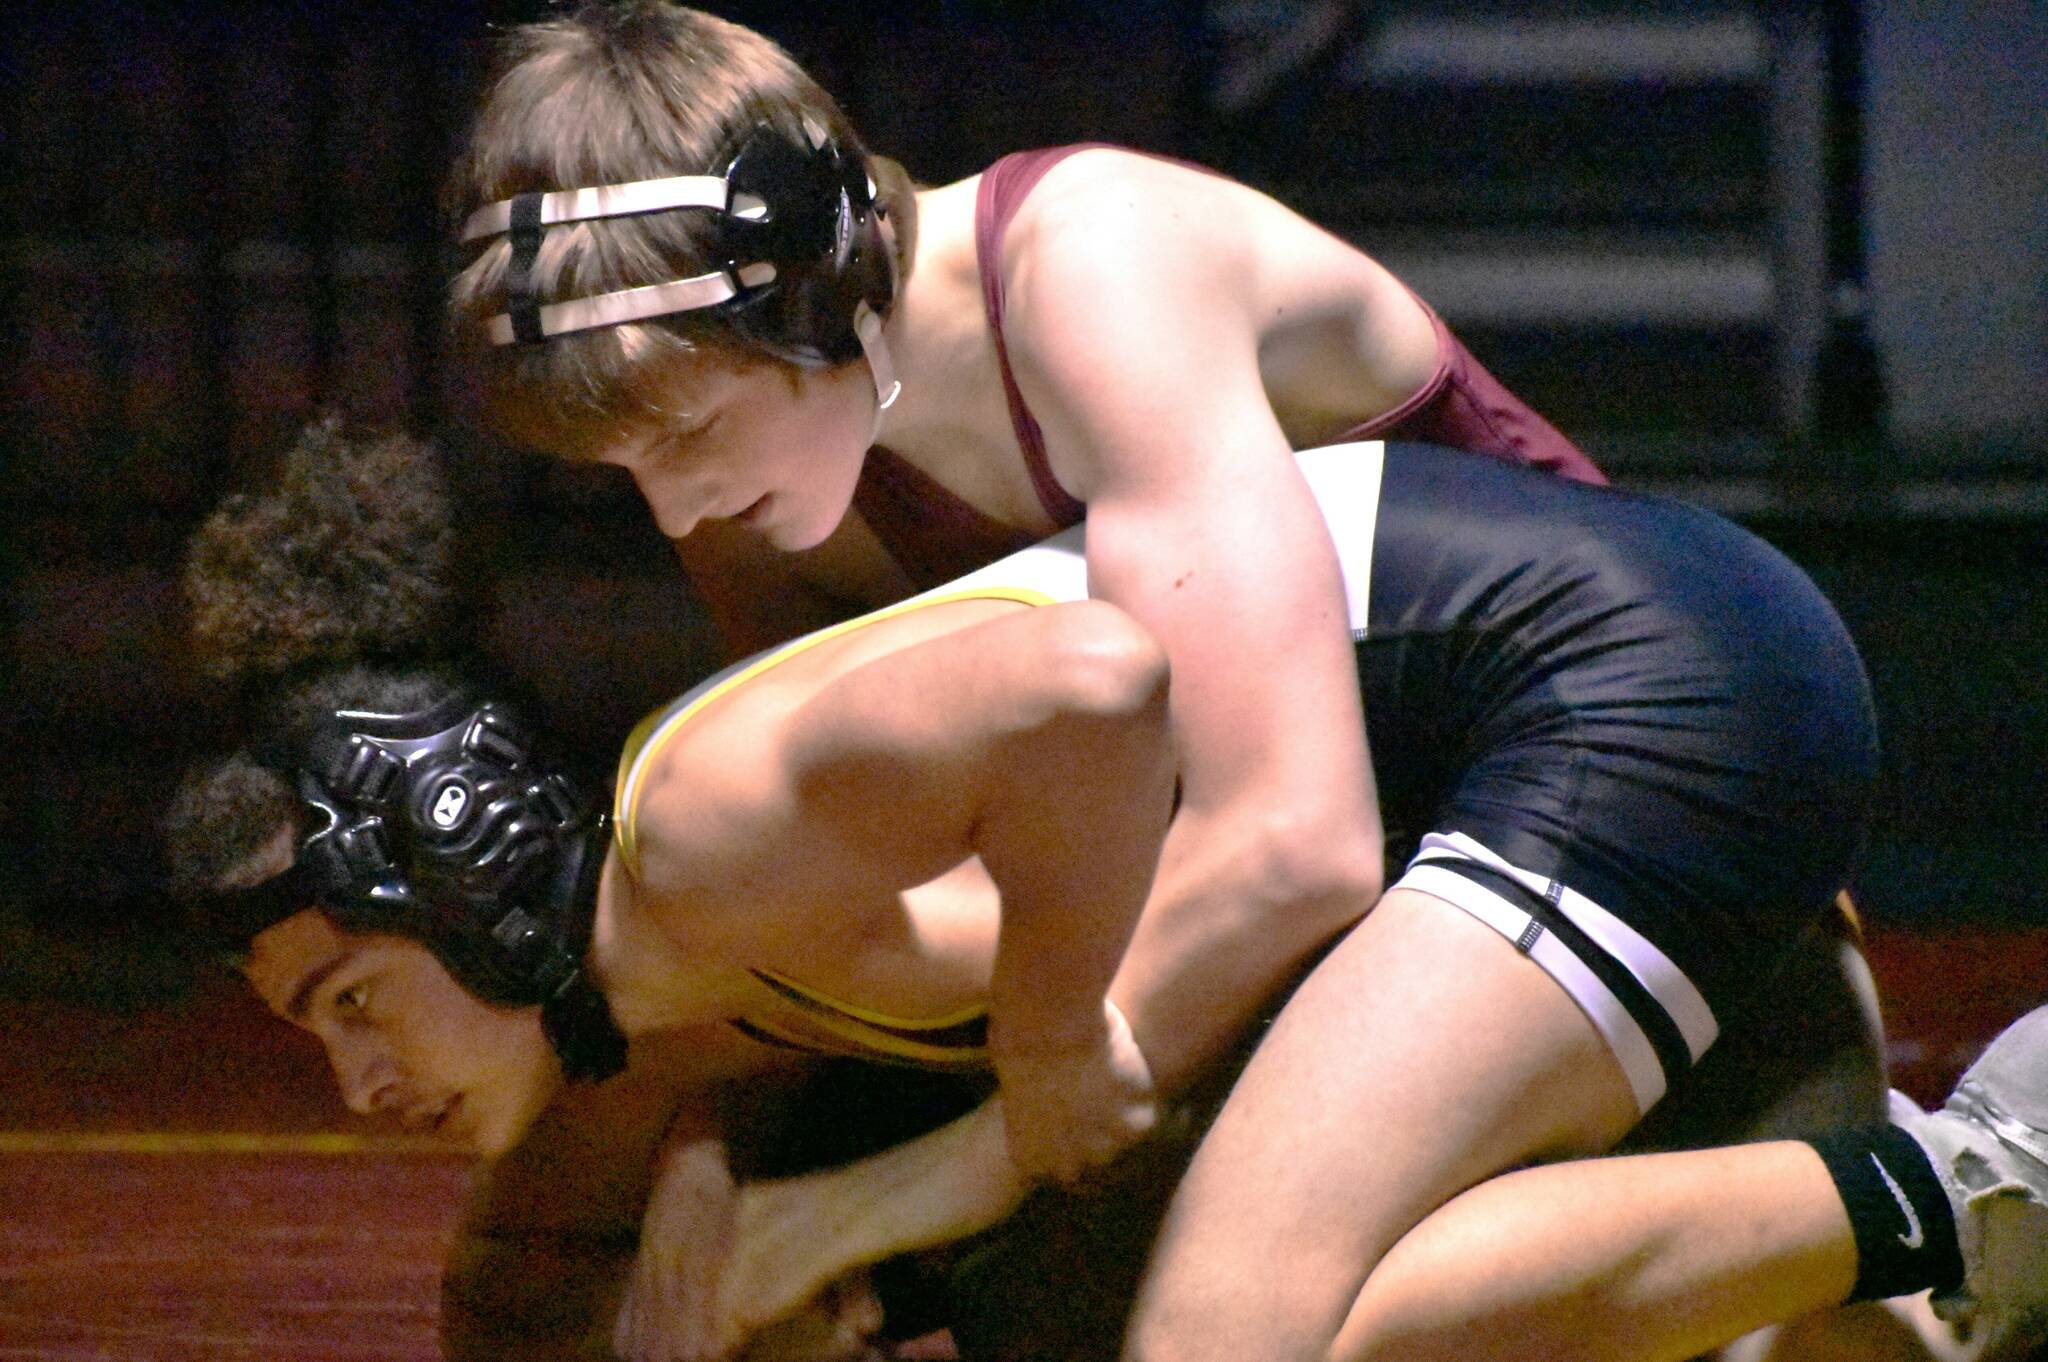 White River wrestlers hosted the Lincoln Abes in a nonleague showdown the evening of Jan. 25. The visitors from Tacoma fared well in some of the lower weights but the Hornets proved too tough, eventually winning 54-30. Pictured here are sophomore Caleb Dale. Photo by Kevin Hanson